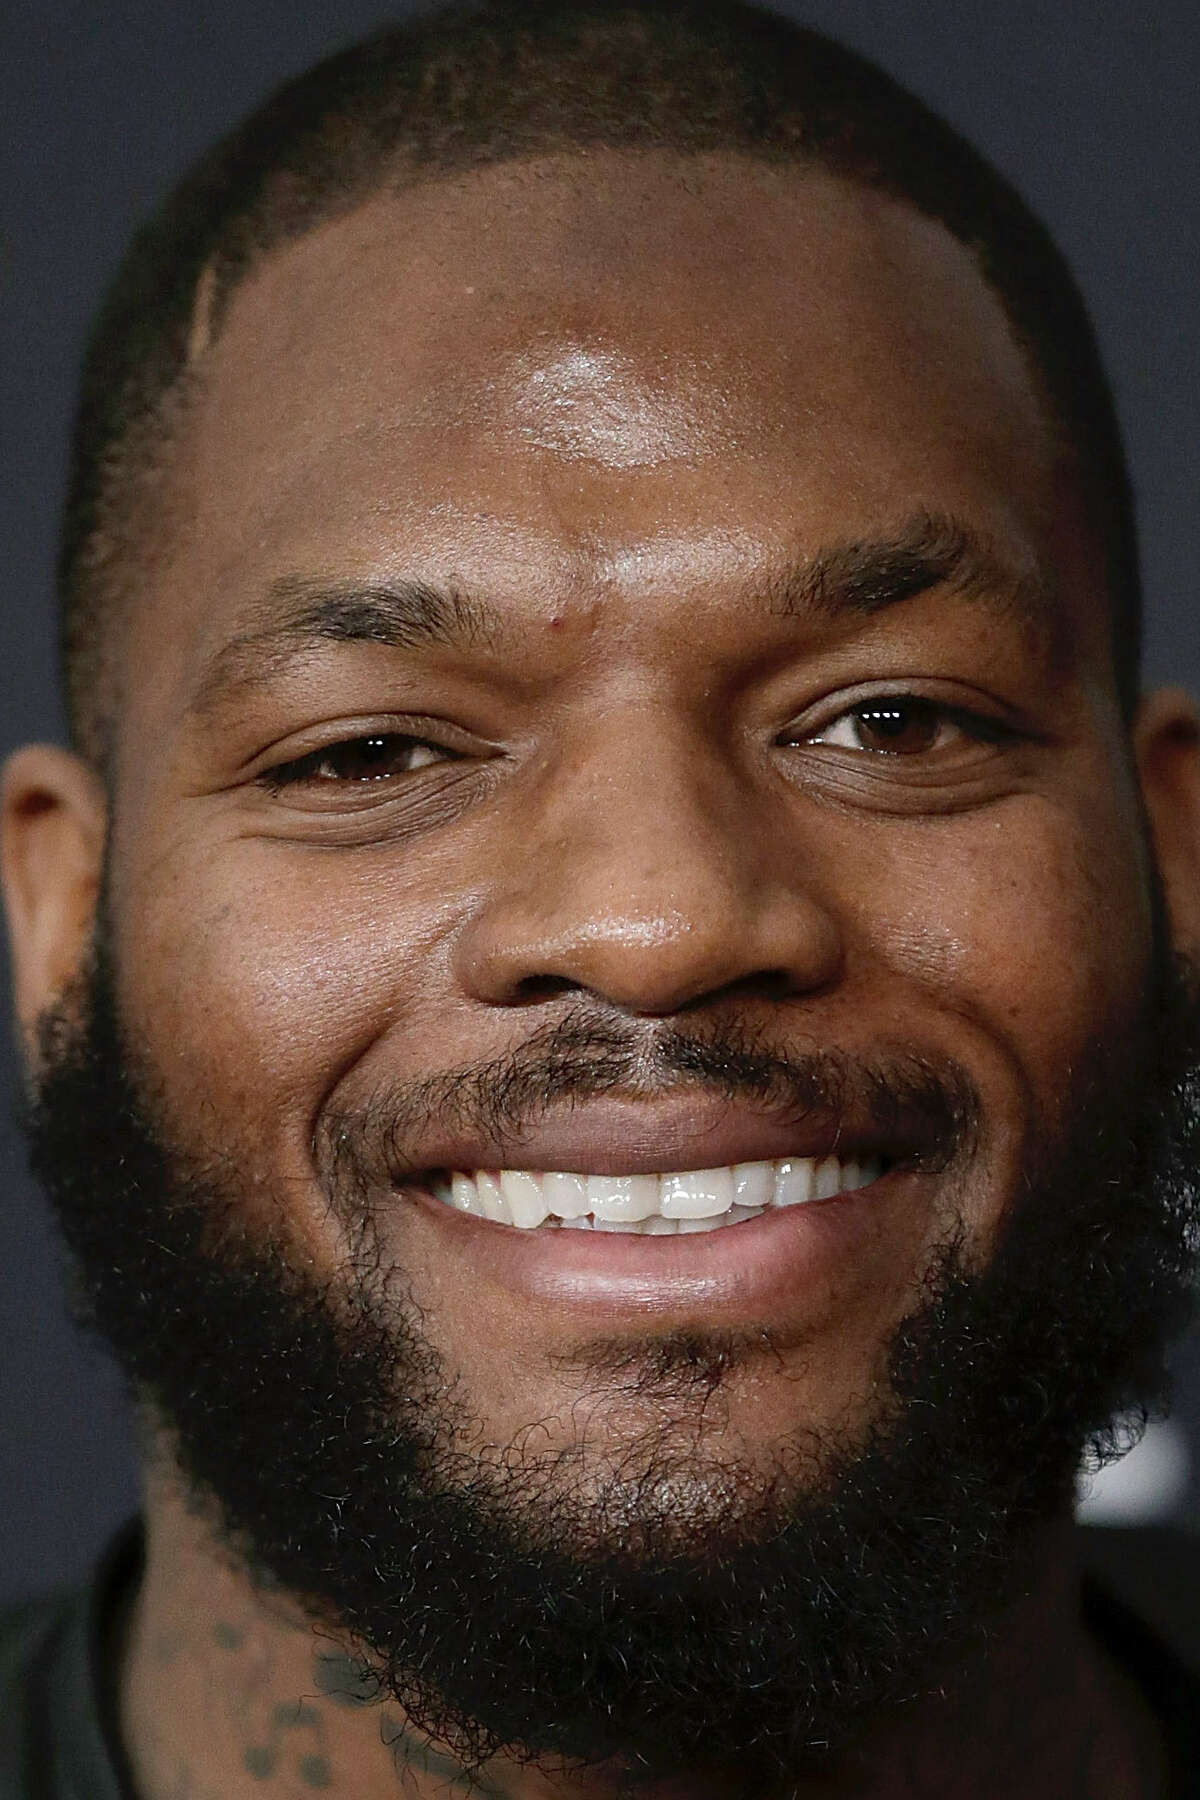 Former Aggies and Cowboys TE Martellus Bennett bodyslammed a teammate in practice.